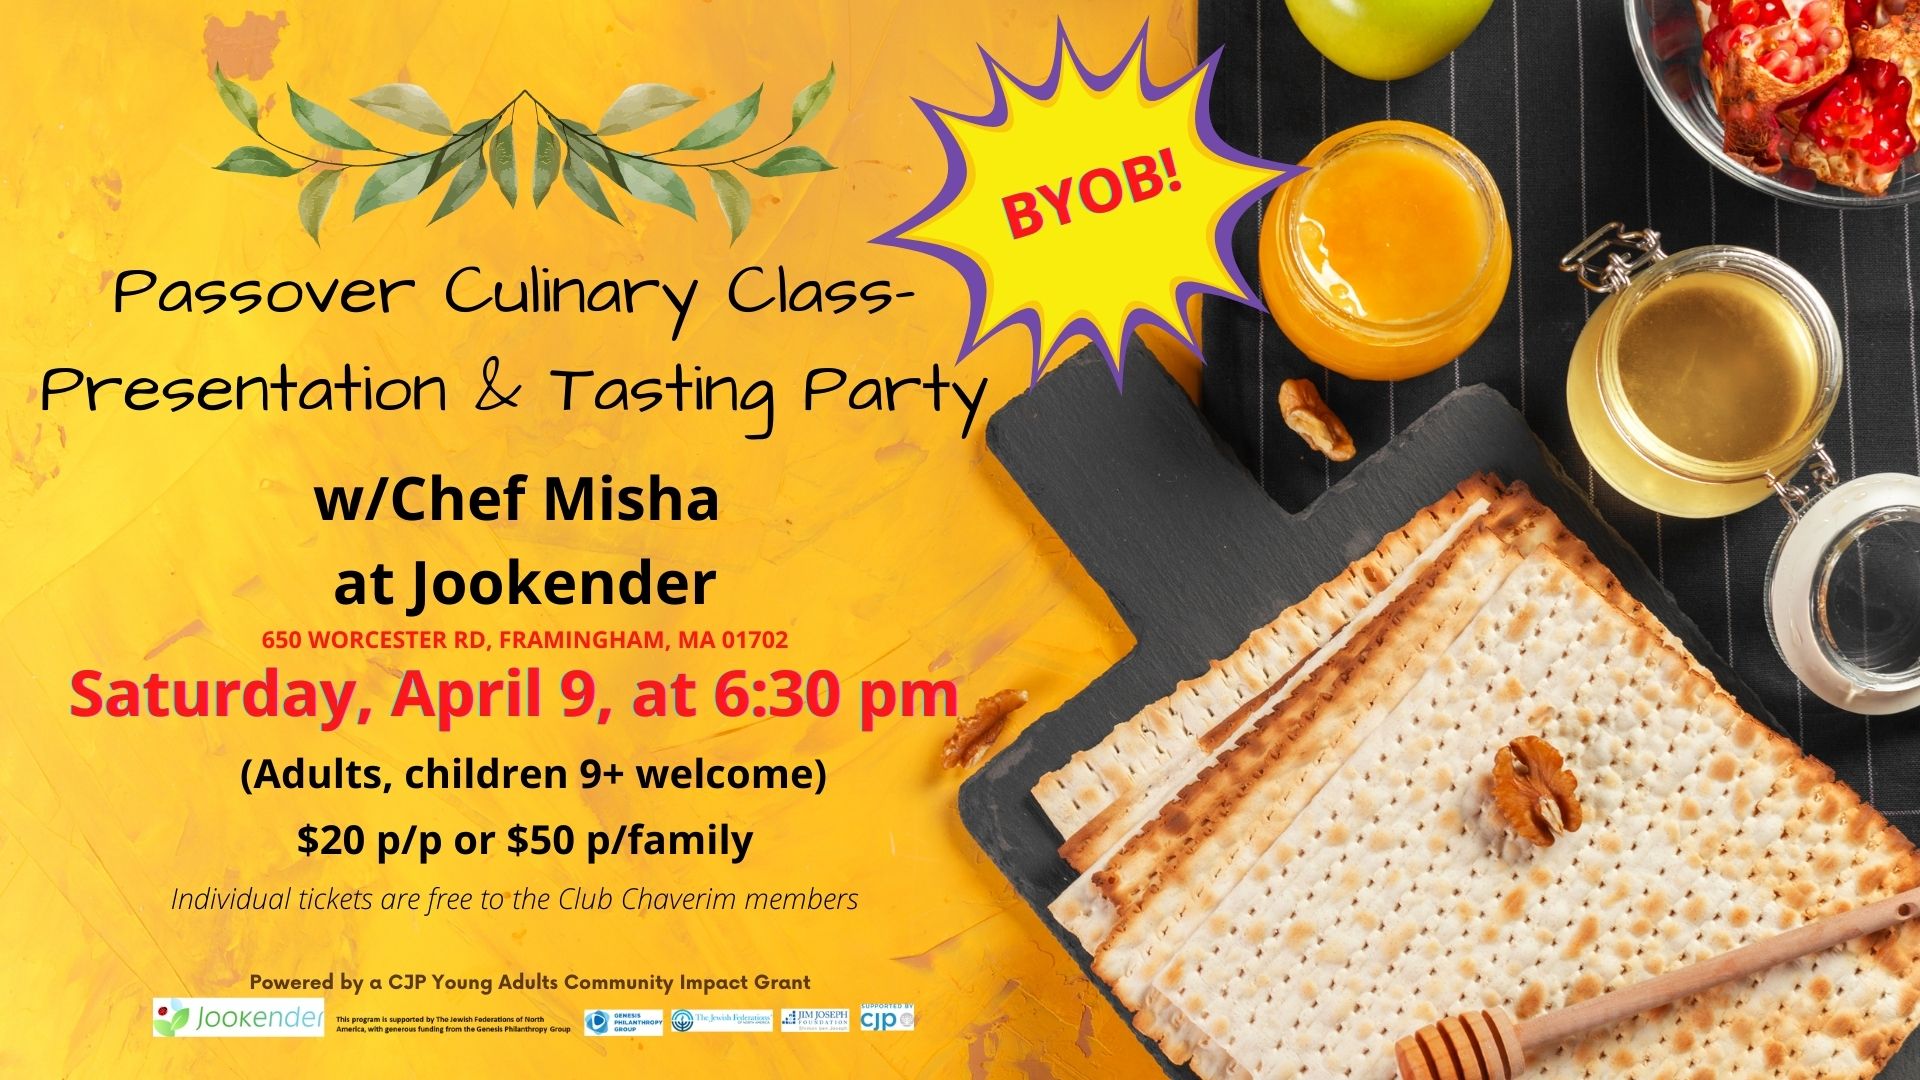 Passover Culinary Class